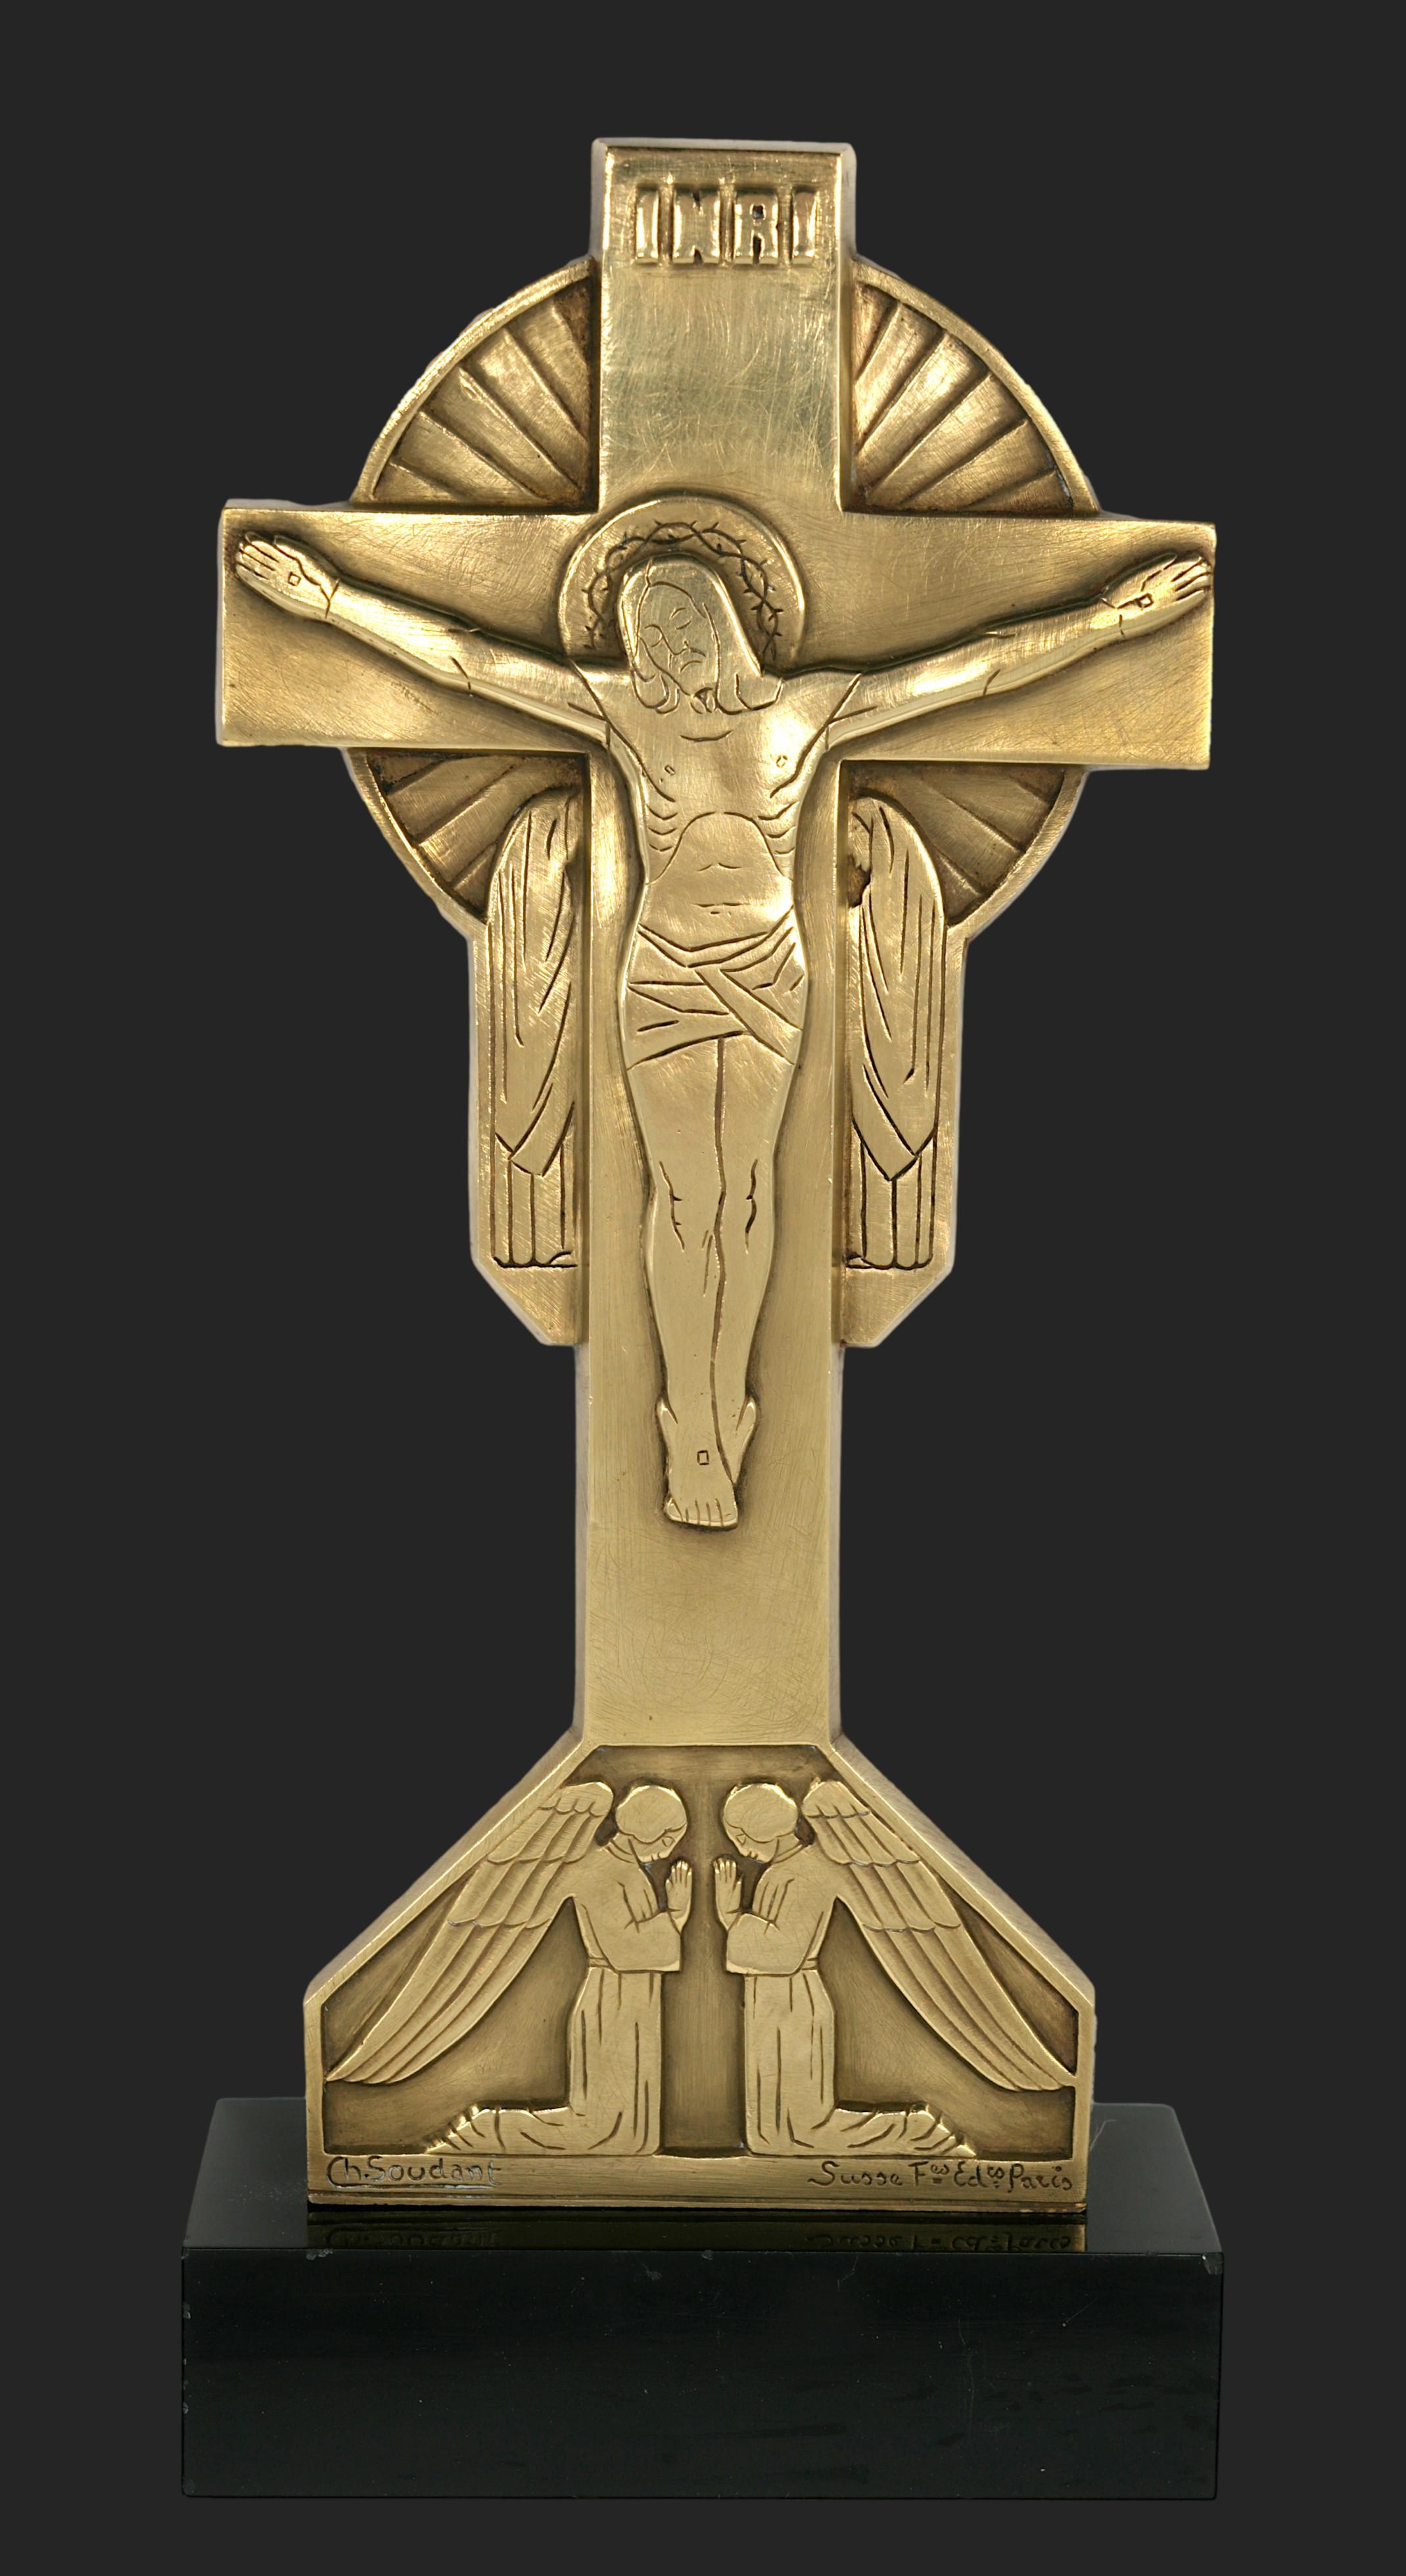 French Art Deco bronze crucifix by Charles SOUDANT, France, 1930s. Very beautiful stylized Christ surrounded by a halo. At his side, Mary and Mary Magdalene. In bas-relief, the archangels Michael and Gabriel. The whole scene is lit by a halo of